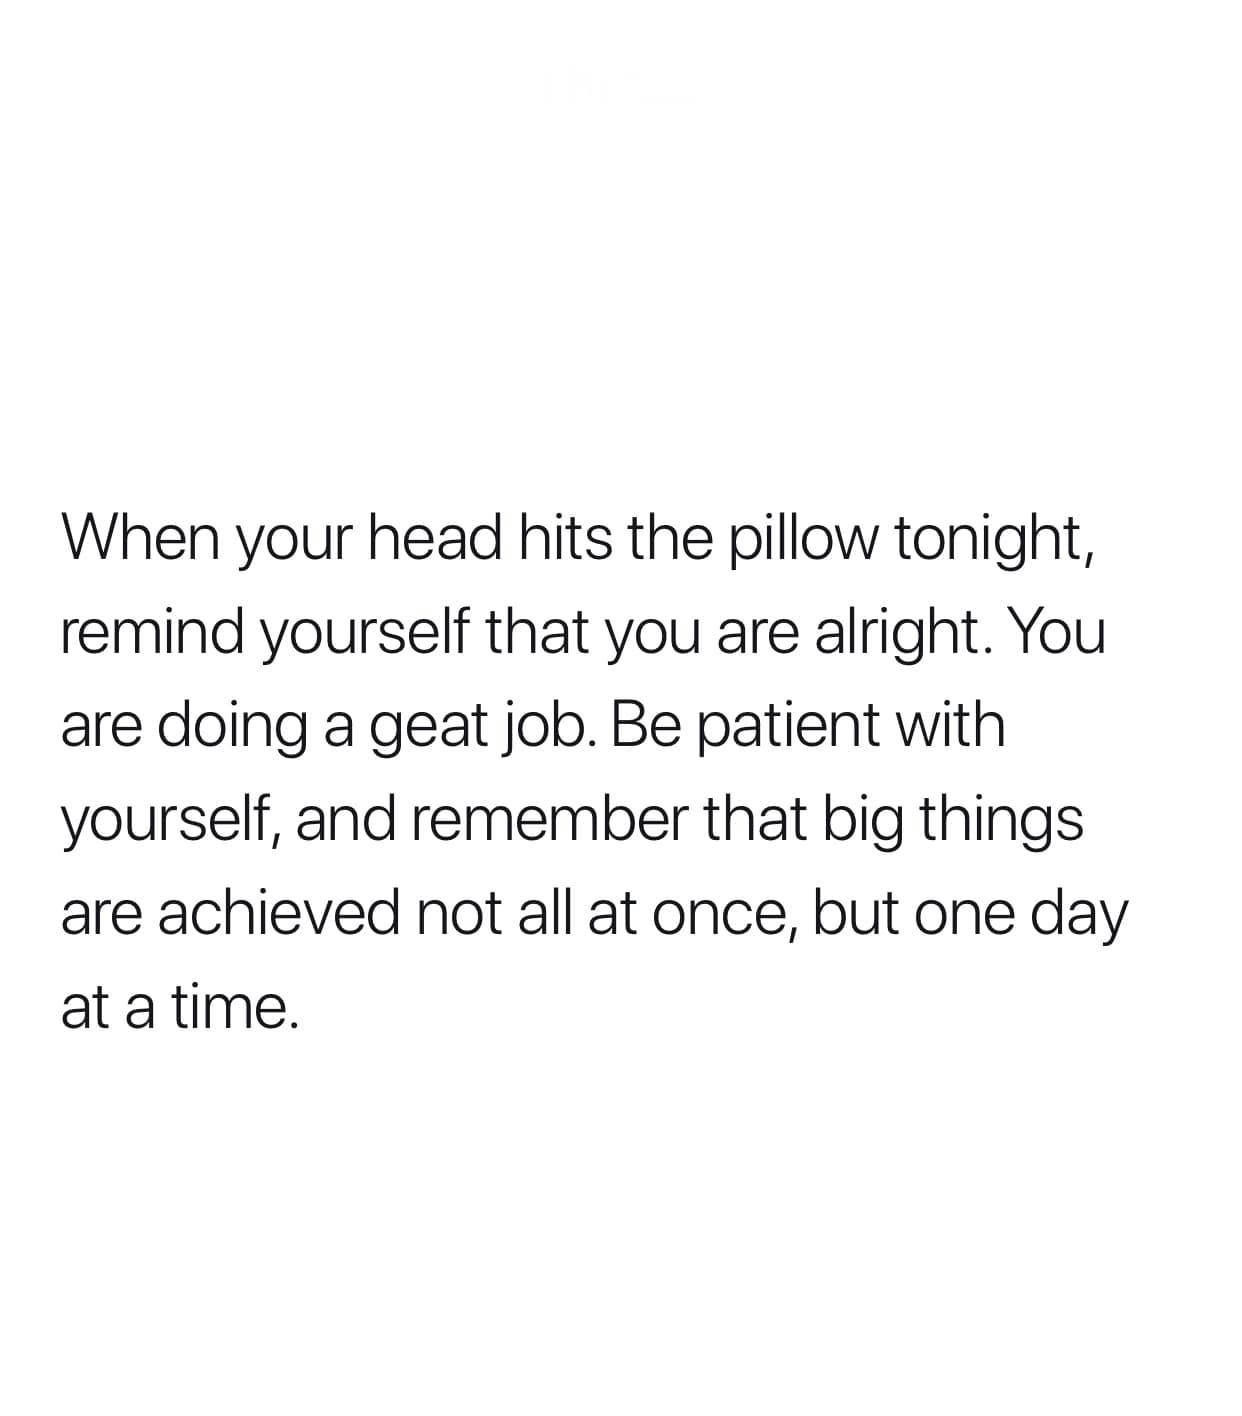 When your head hits the pillow tonight, remind yourself that you are alright